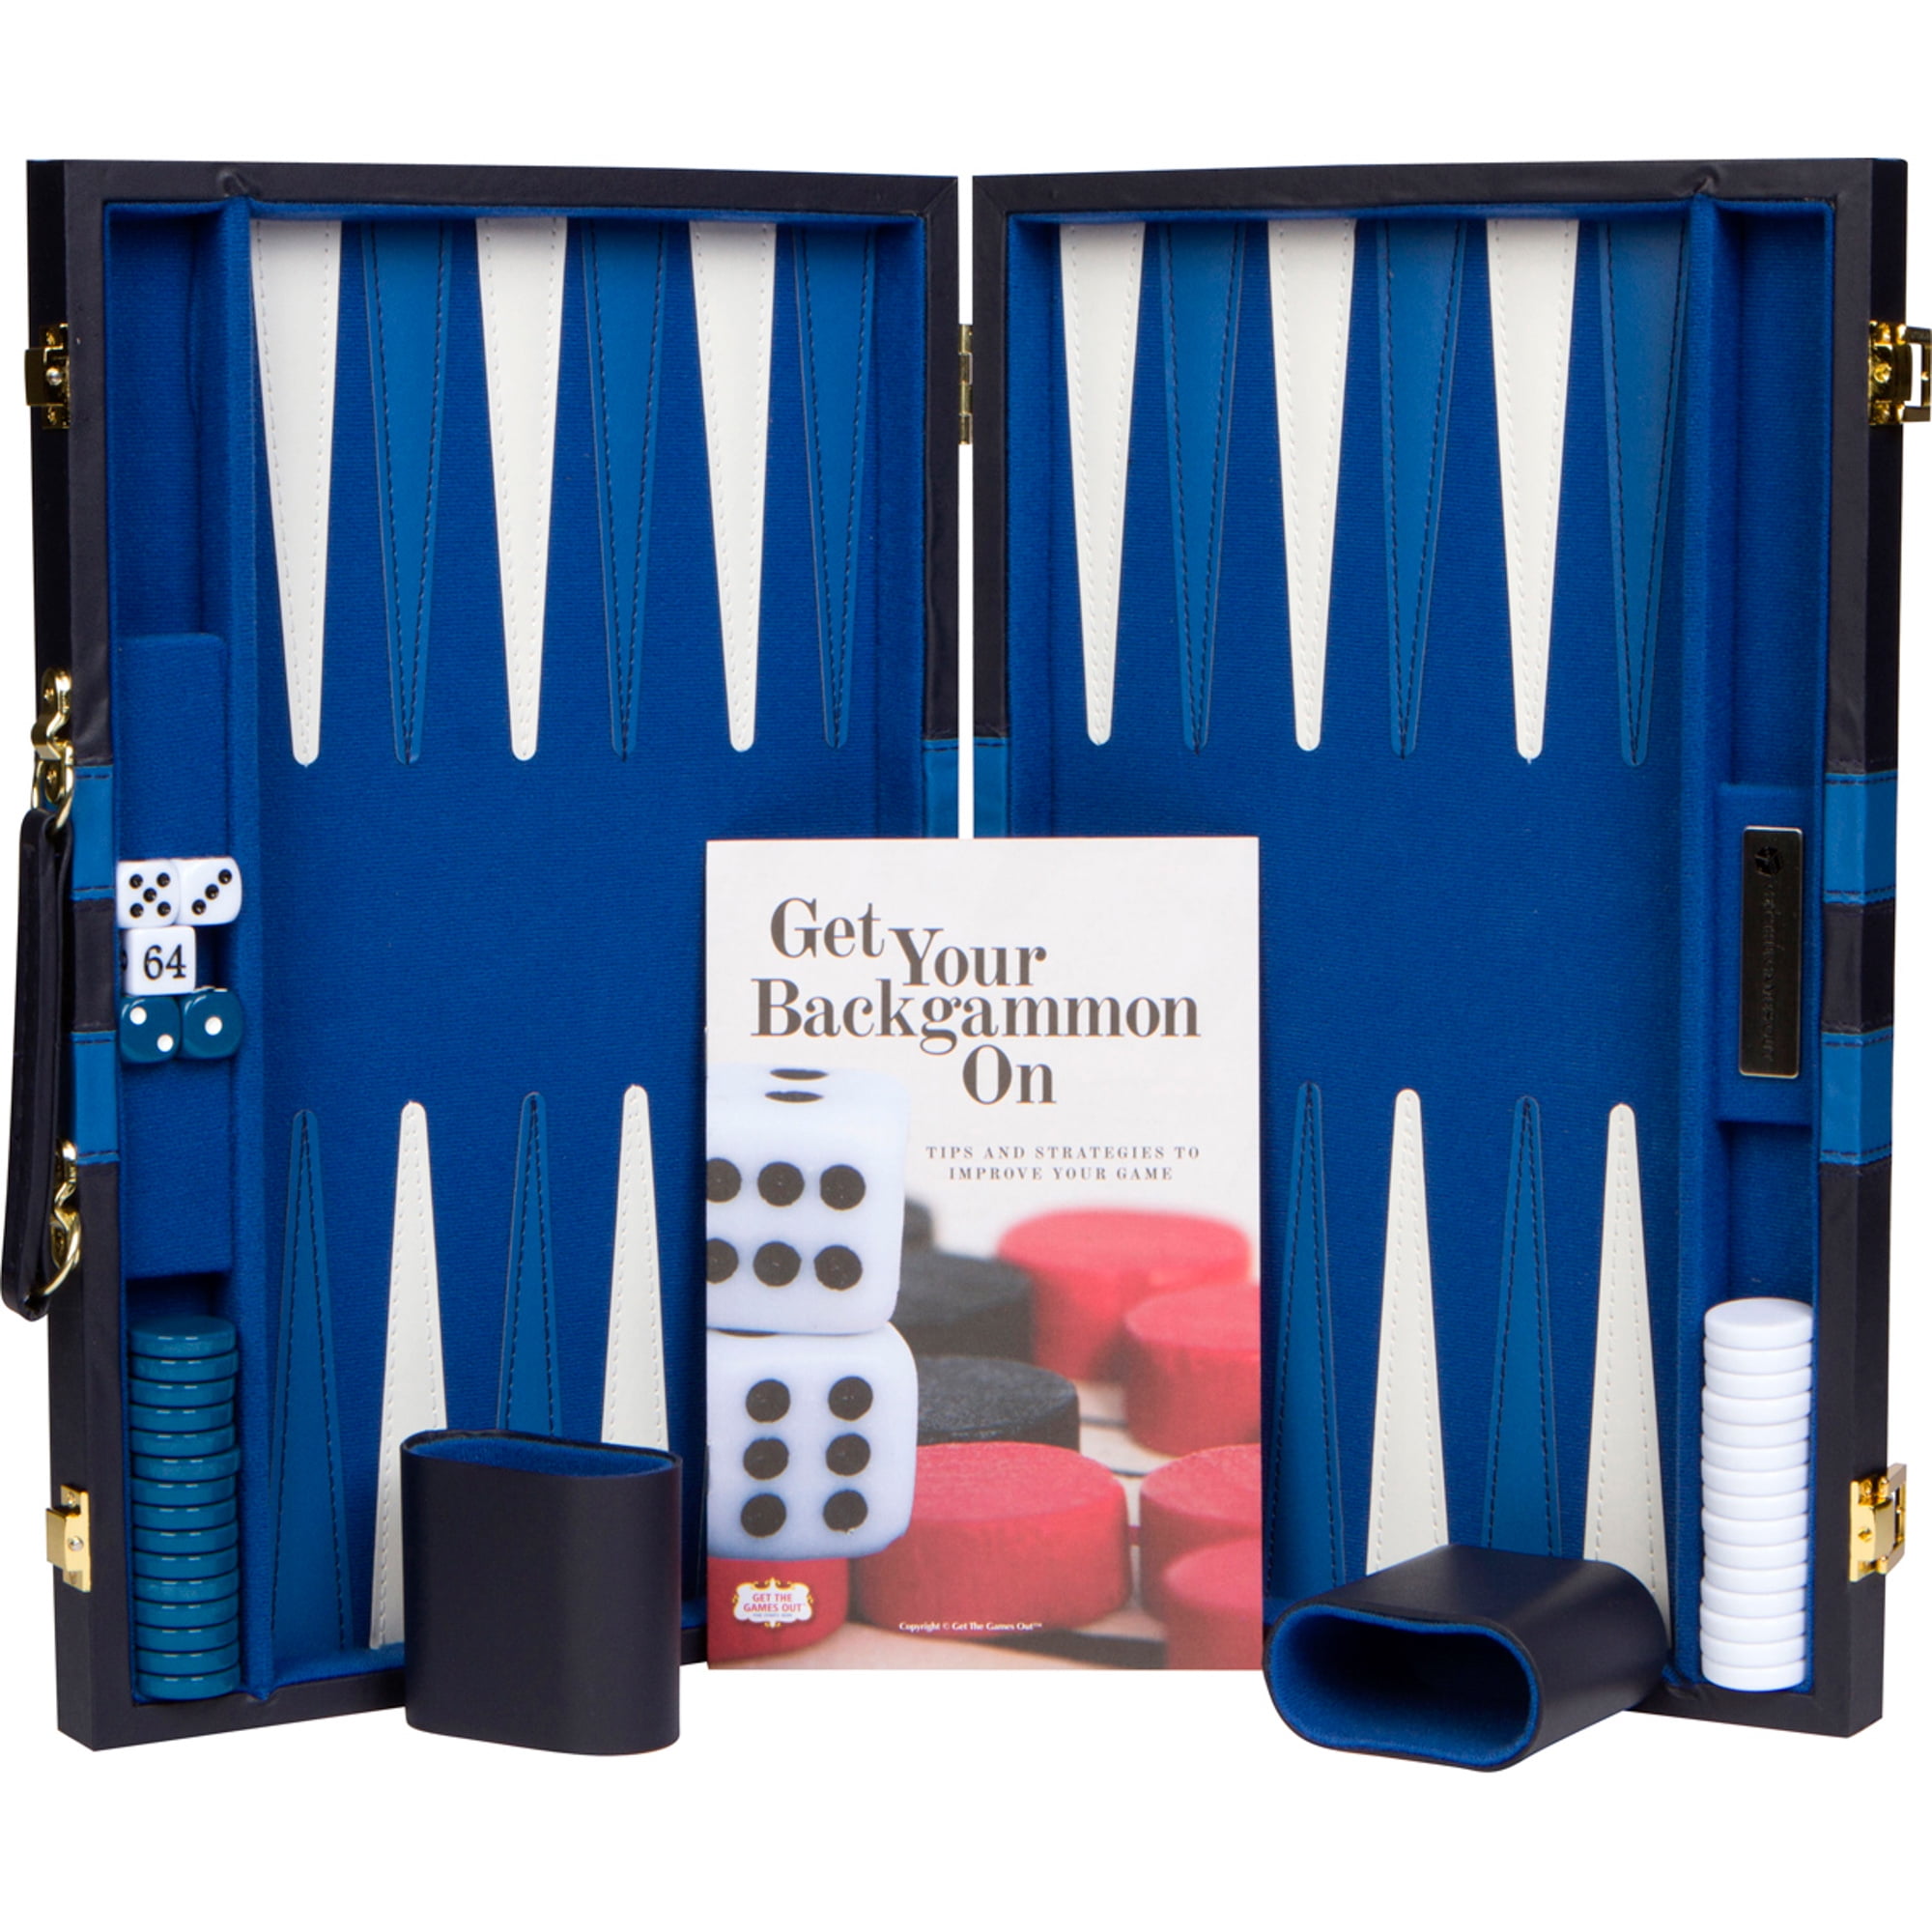 Get The Games Out Top Backgammon Set - Classic Board Game Case 15 